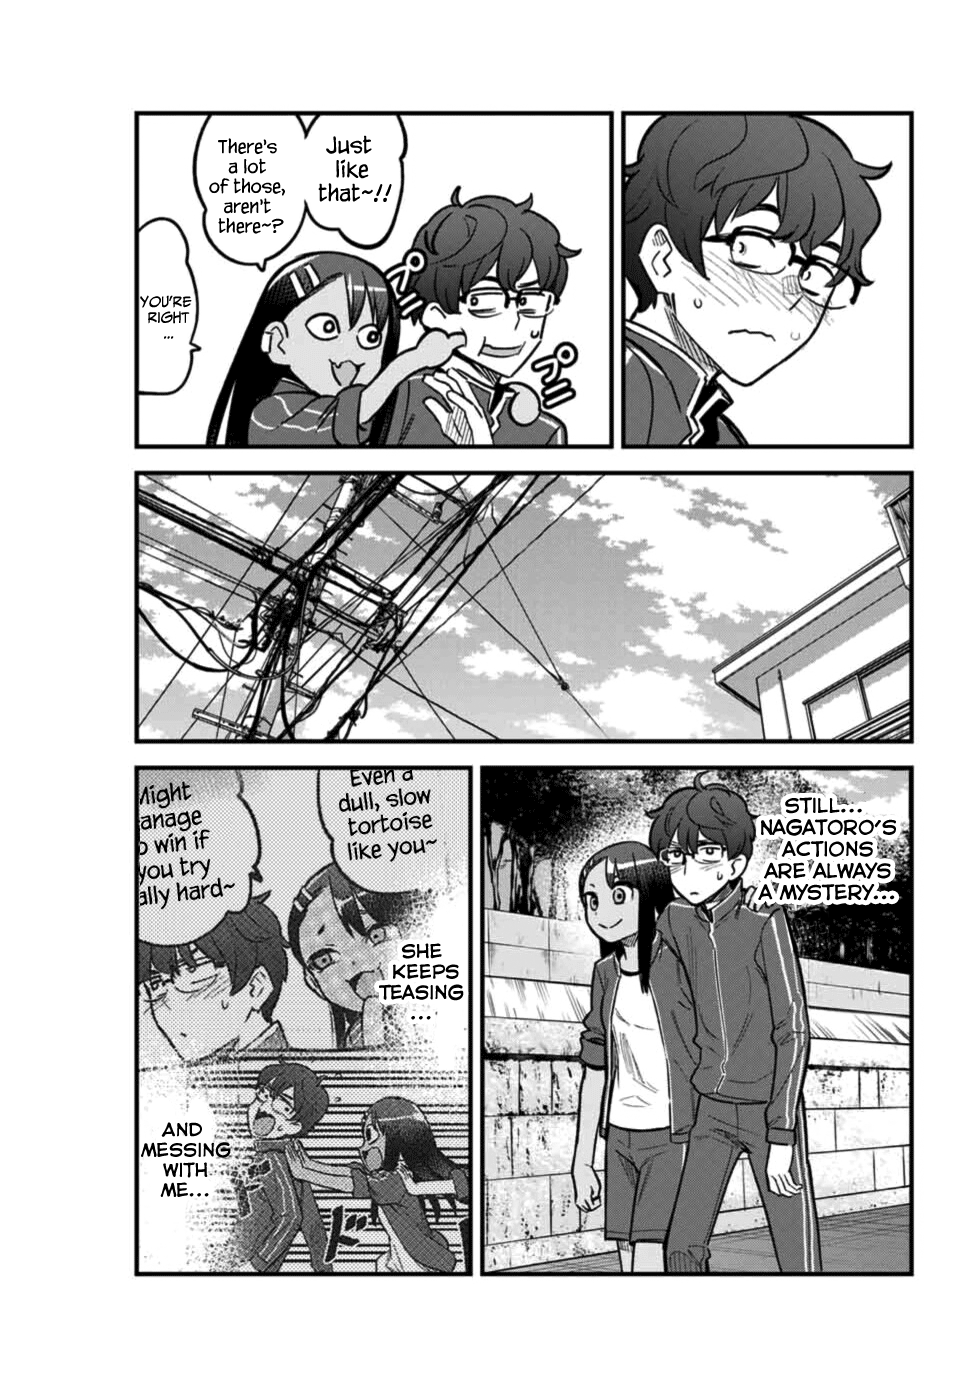 Ijiranaide, Nagatoro-San Vol.8 Chapter 57: That's A Nice Line~ Coming From You, Paisen!! - Picture 3